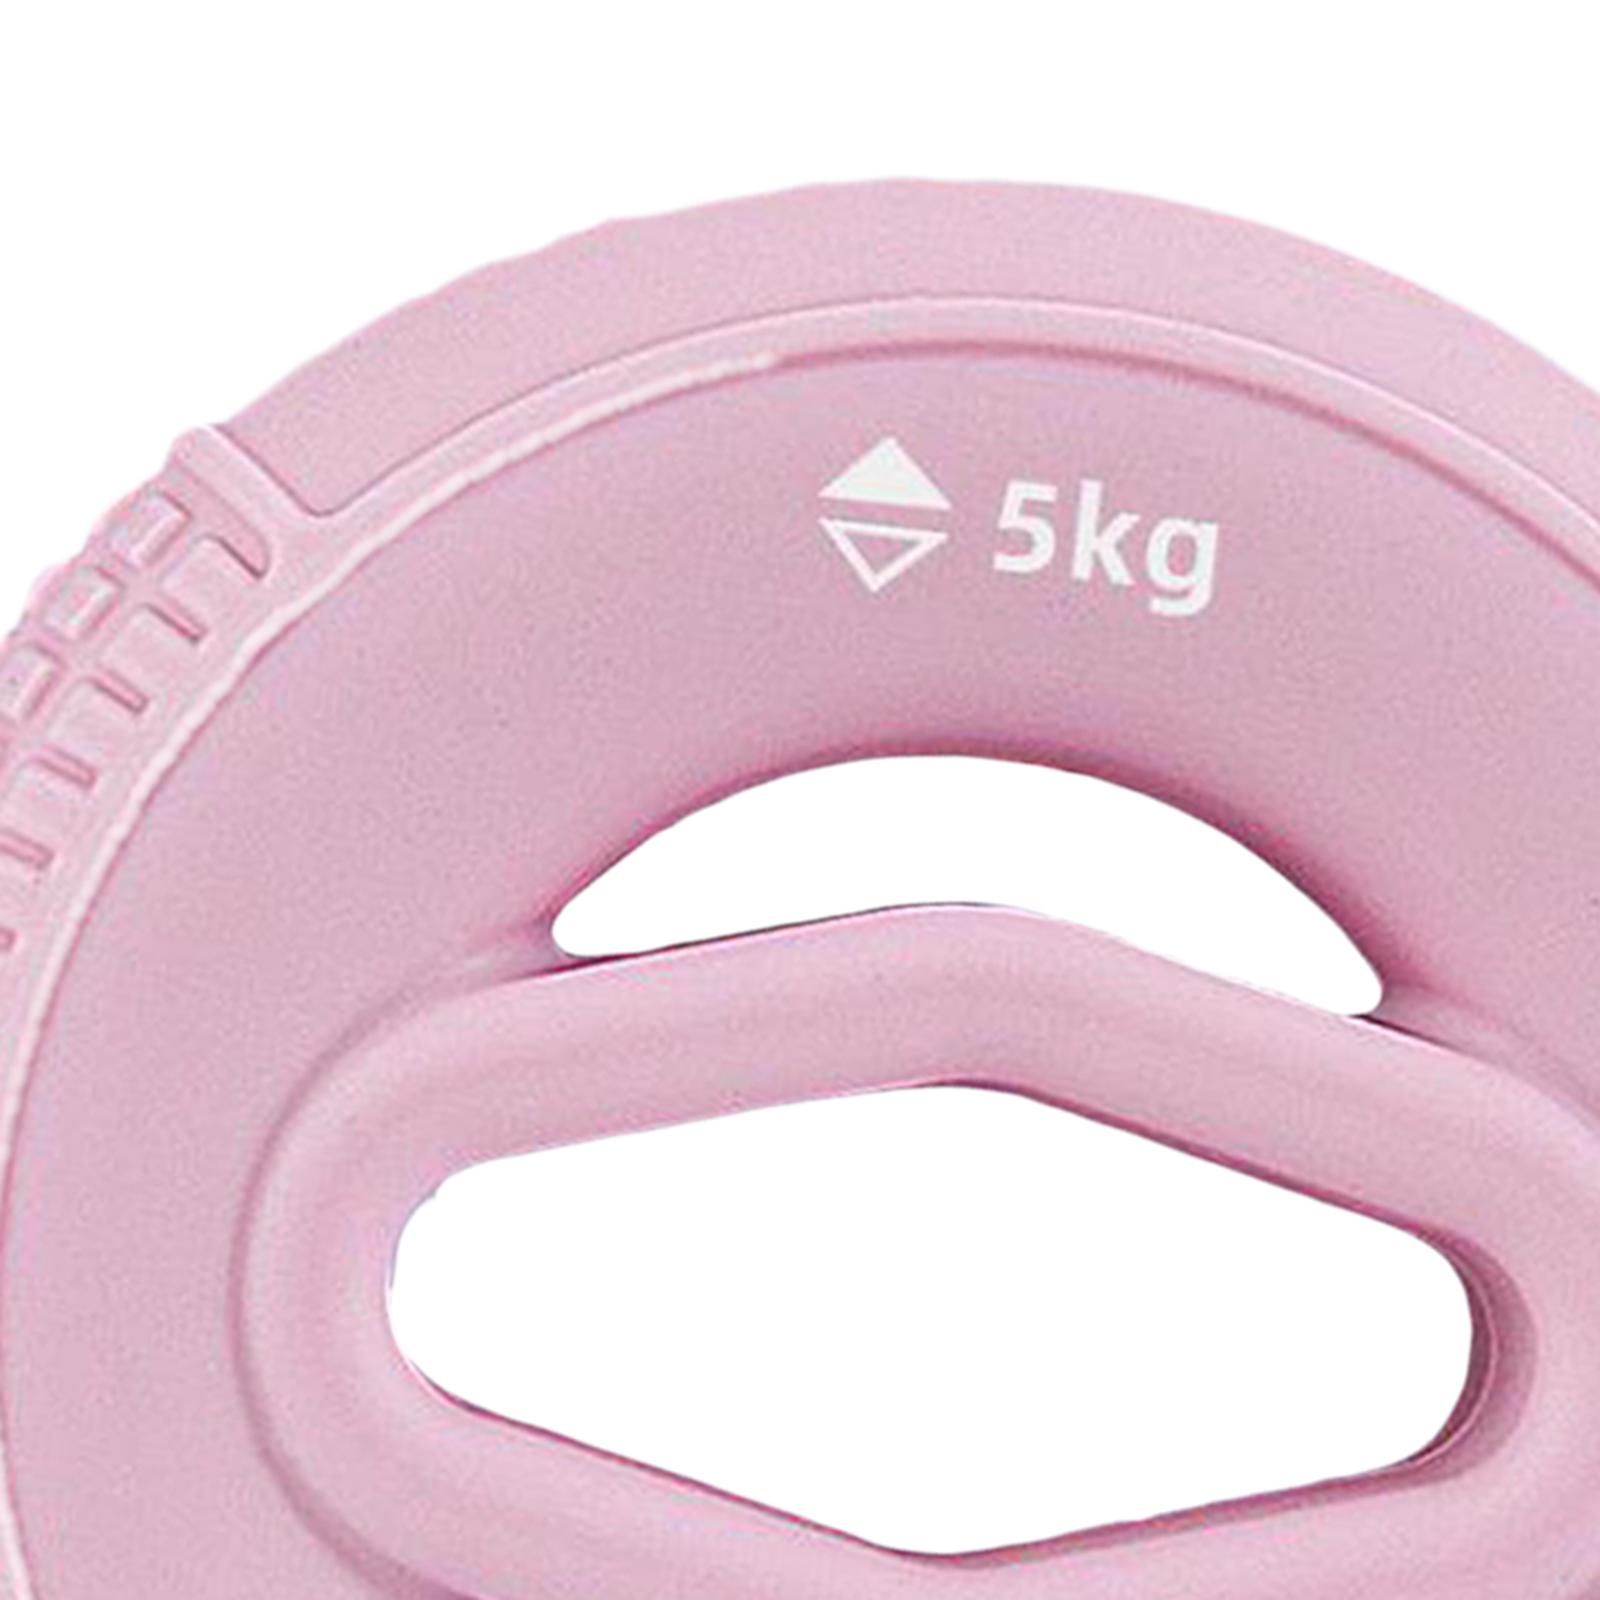 Hand Gripper Ring Crushing Training Fitness Grip Ball Hand Grip Strengthener pink 5 to 10kg